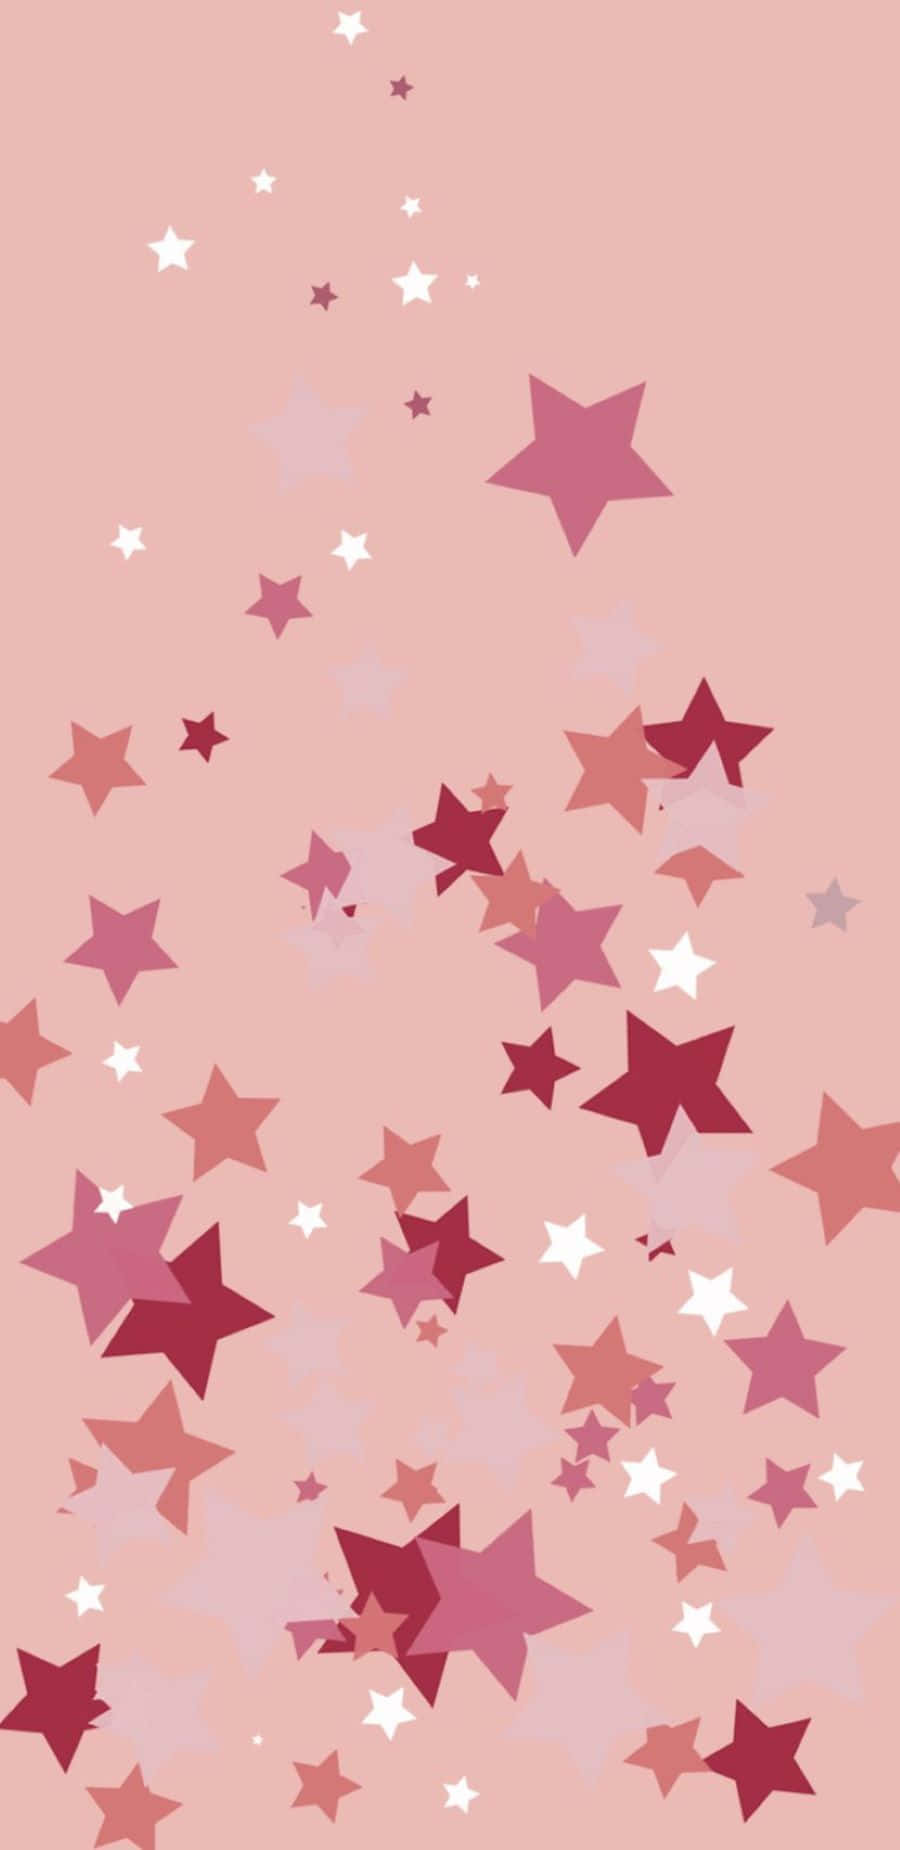 Brighten Up Your Bedroom With This Aesthetic Star Wallpaper! Background